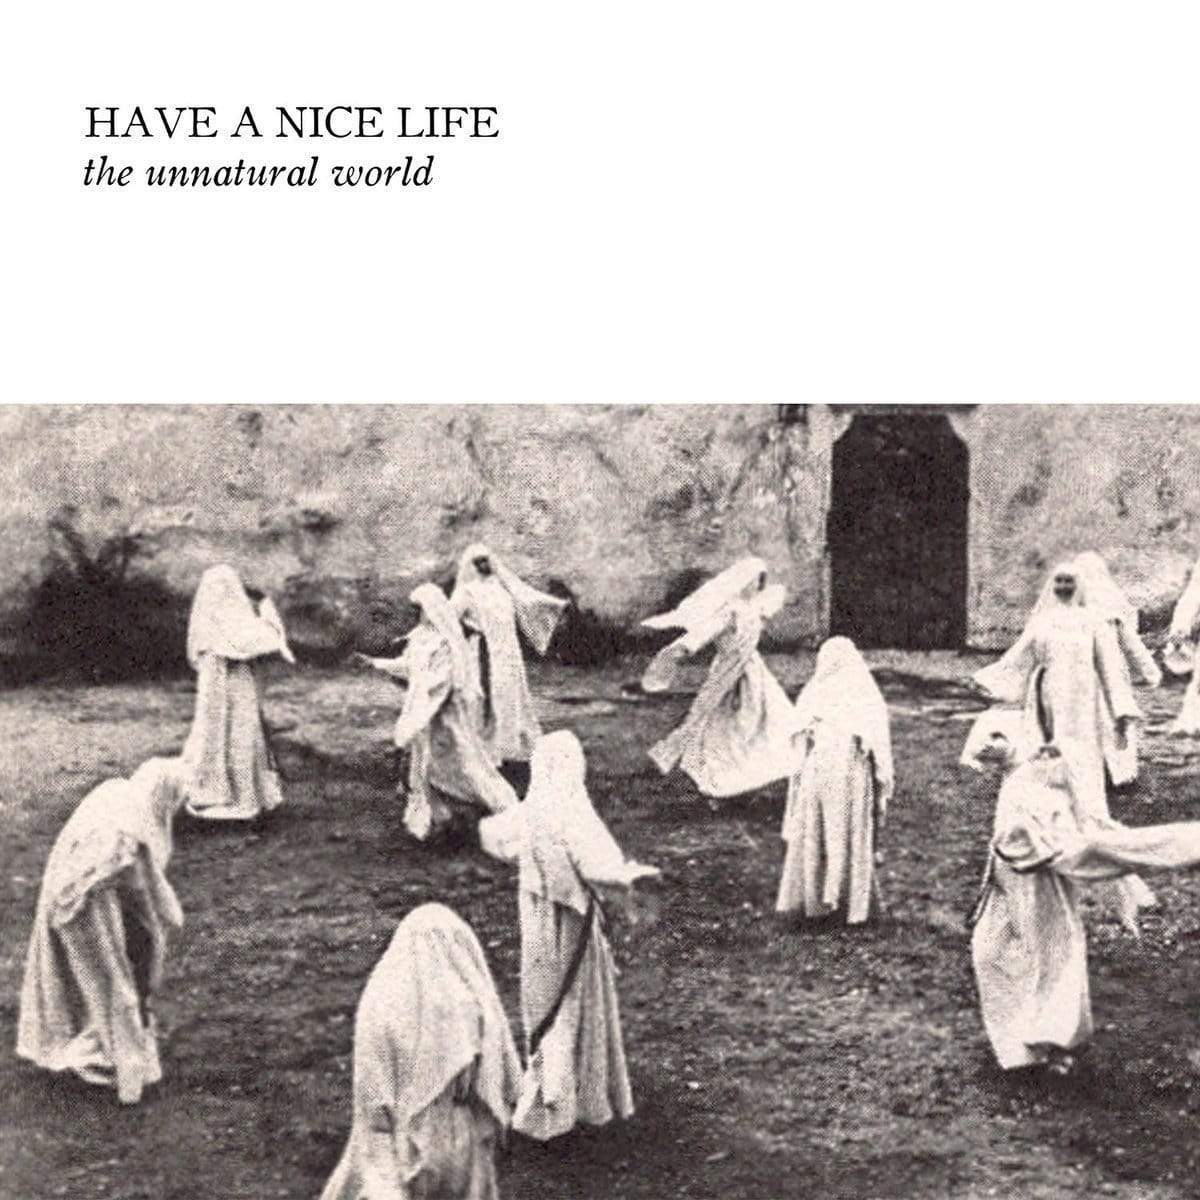 The Flenser CD Have a Nice Life "The Unnatural World" CD